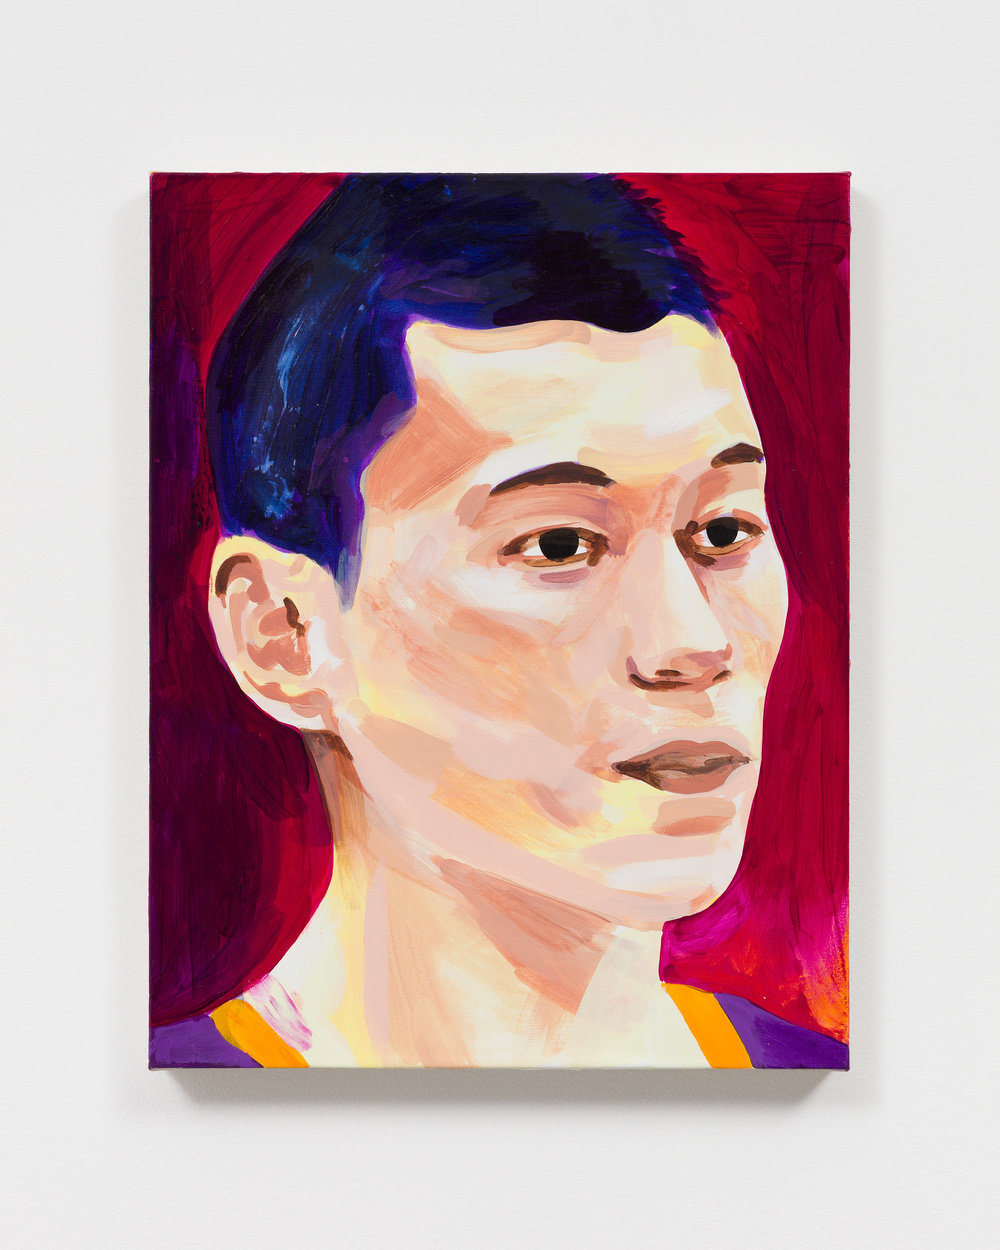 Kuo, lin (lakers) 1, 2020, acrylic on linen, 18 x 14 in., 45.7 x 35.6 cm, cnon 62.178 pierre le hors